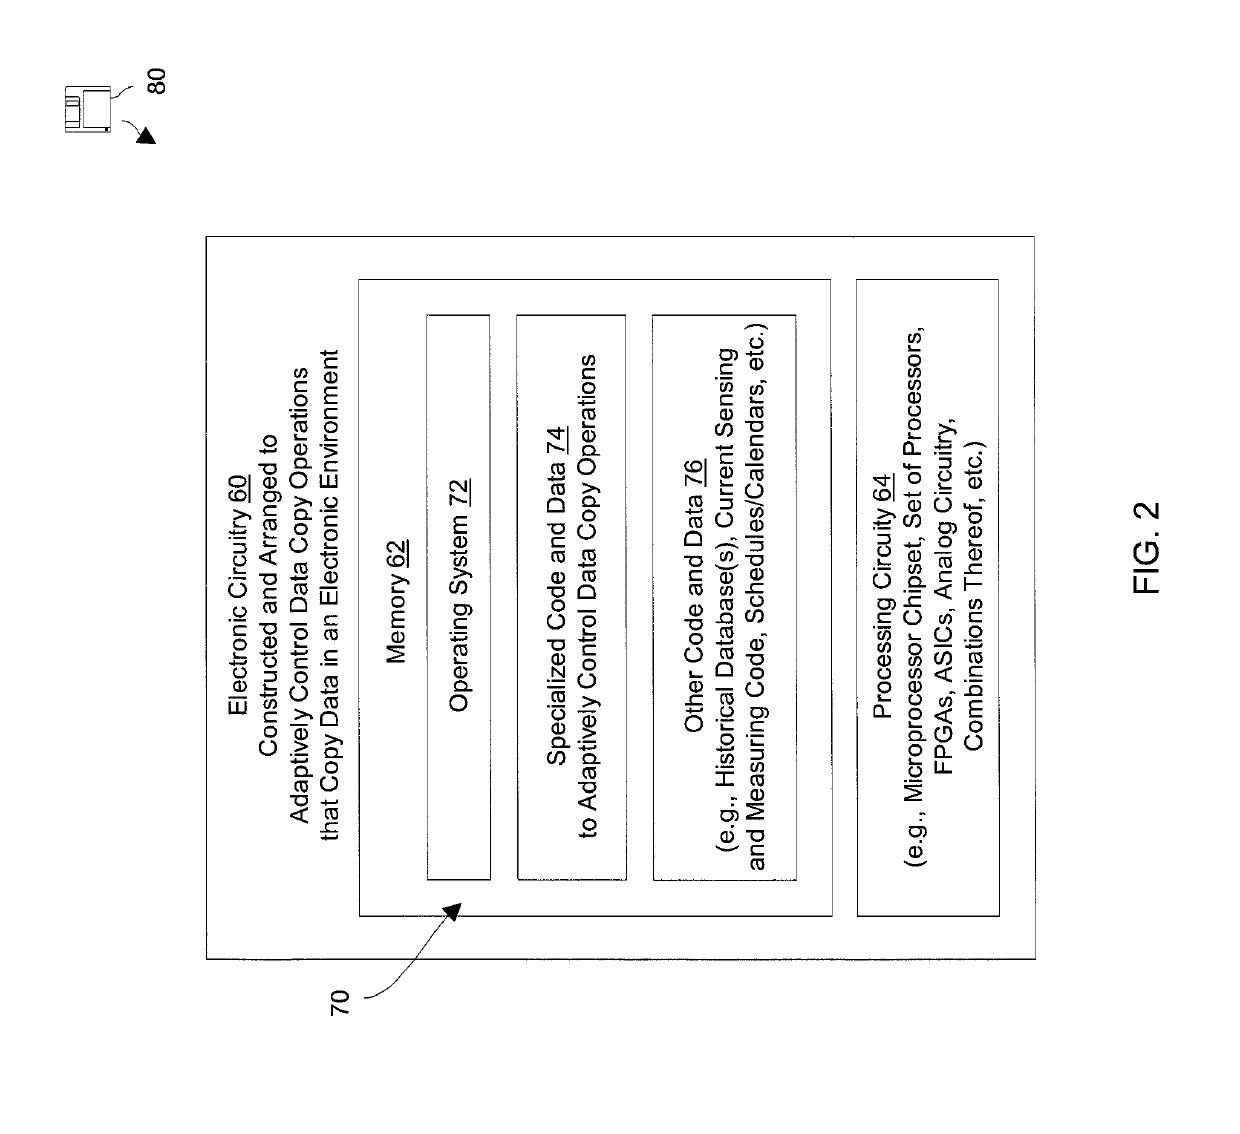 Adaptively controlling data copy operations that copy data in an electronic environment